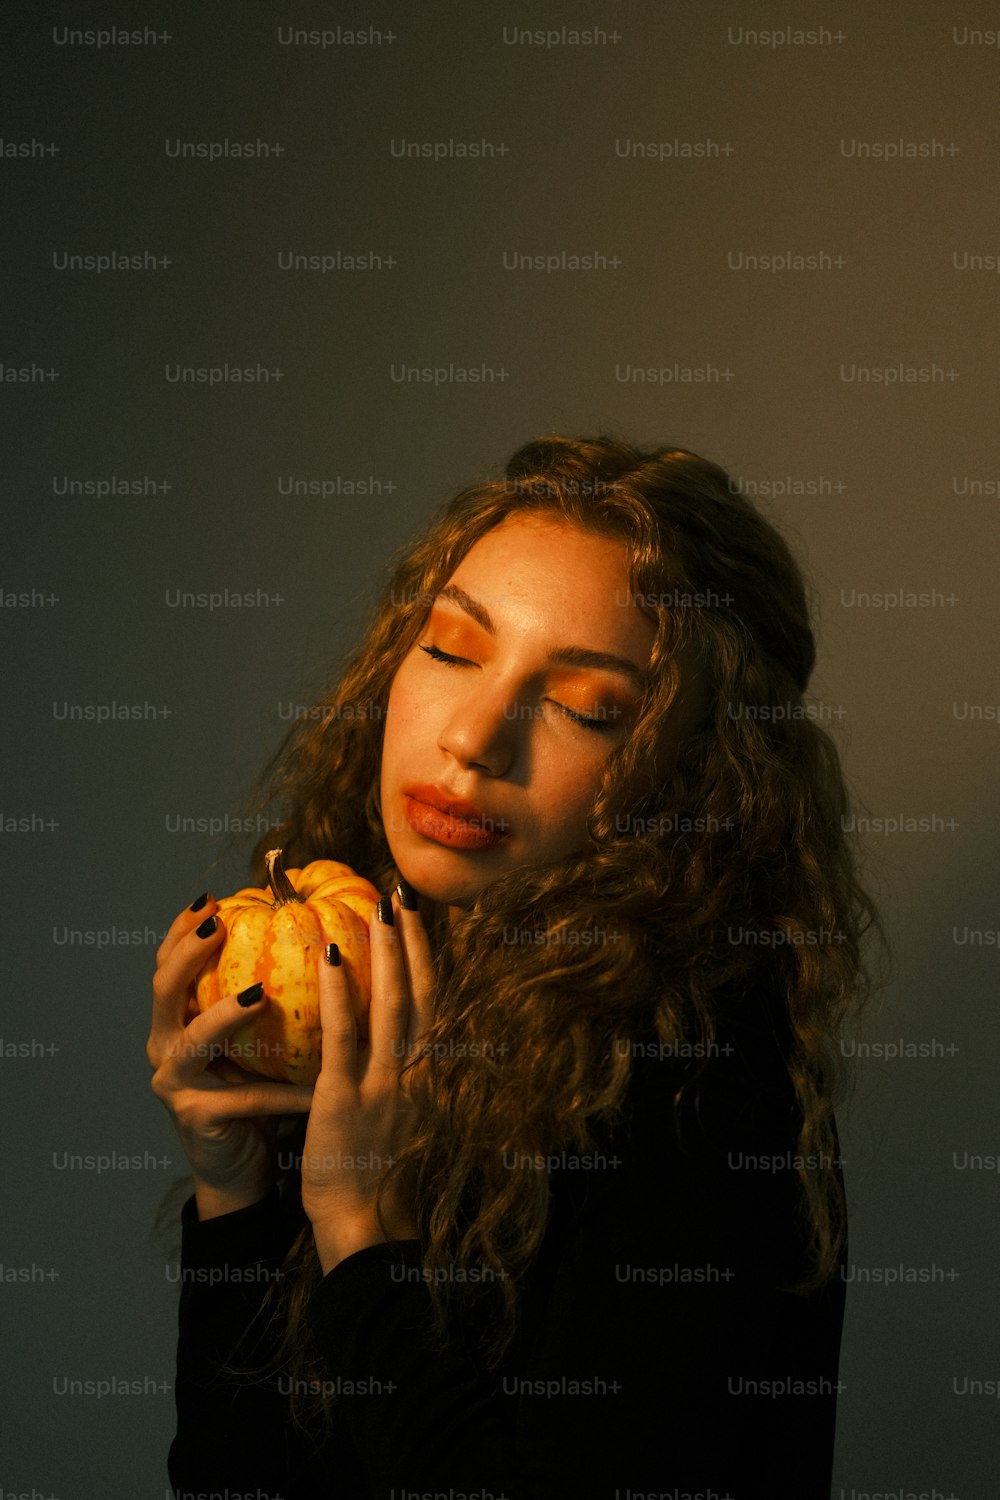 a woman holding a piece of fruit up to her face